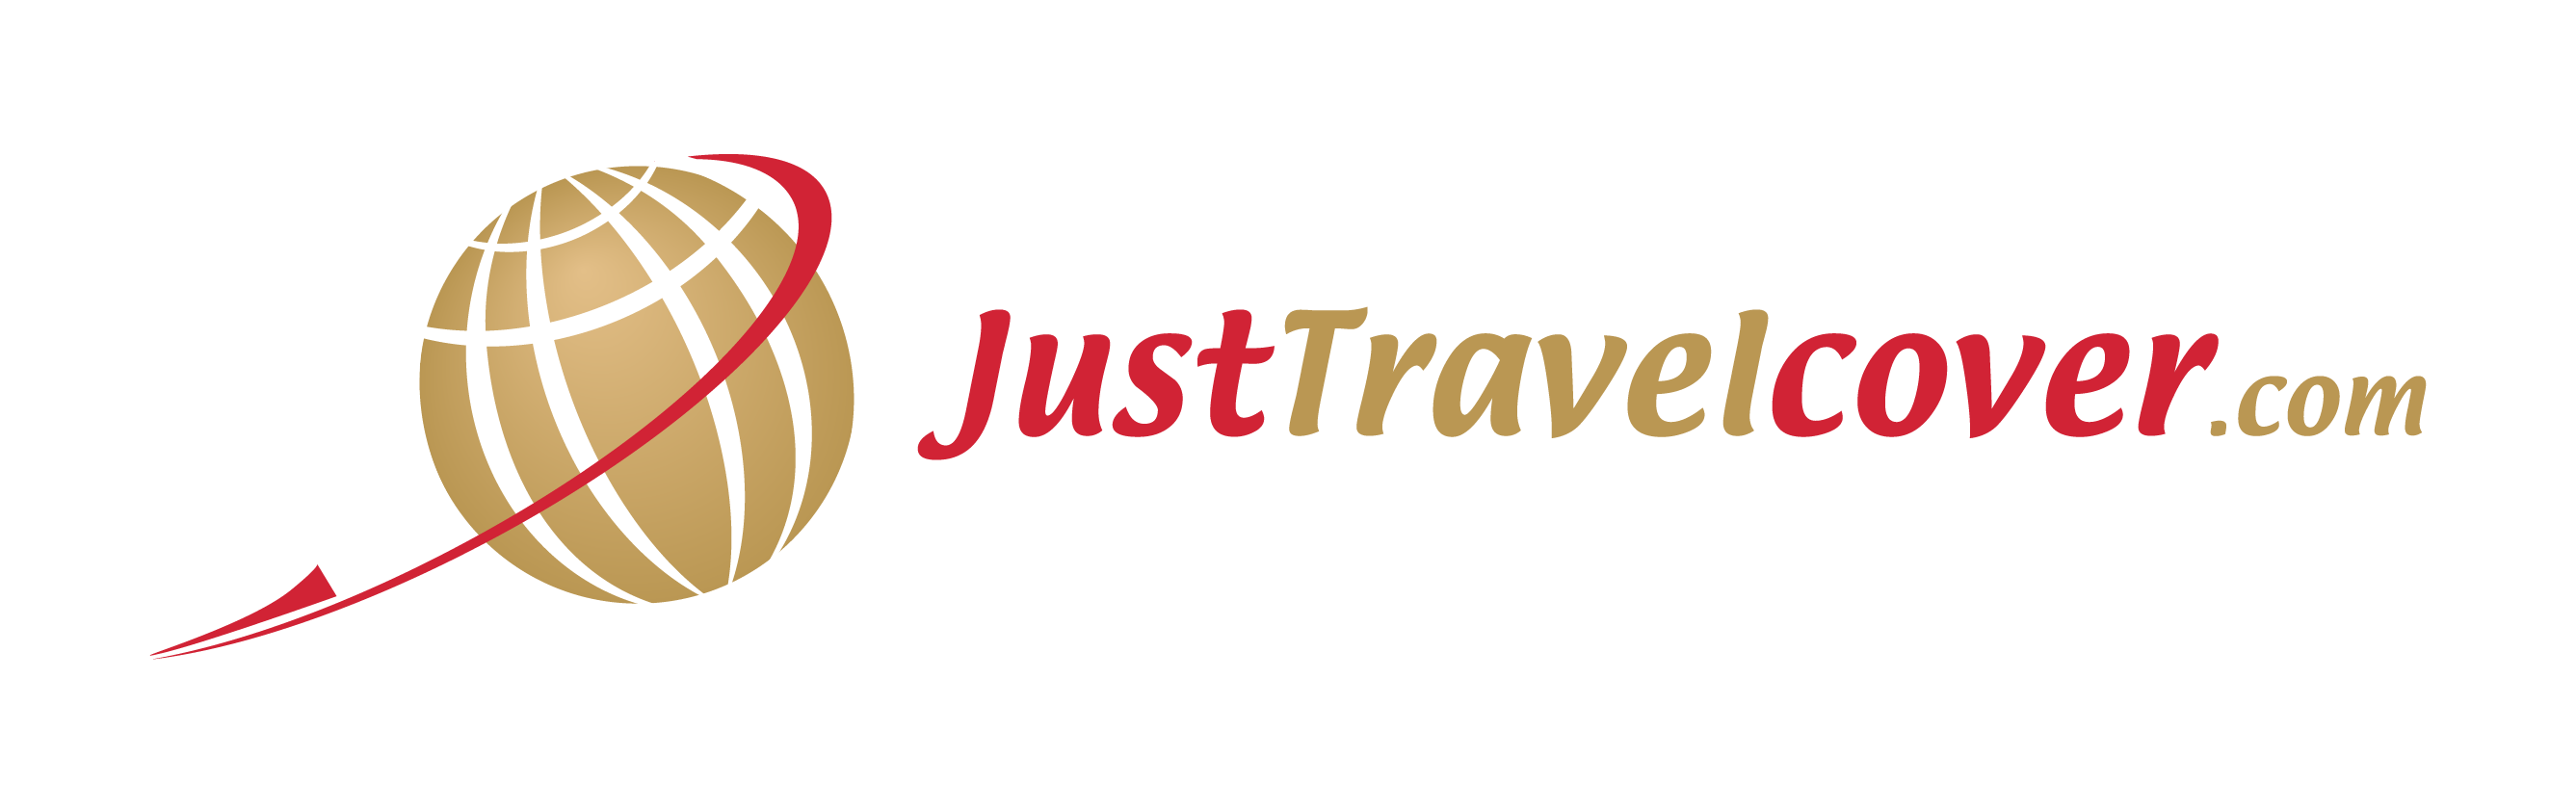 JustTravelCover.com